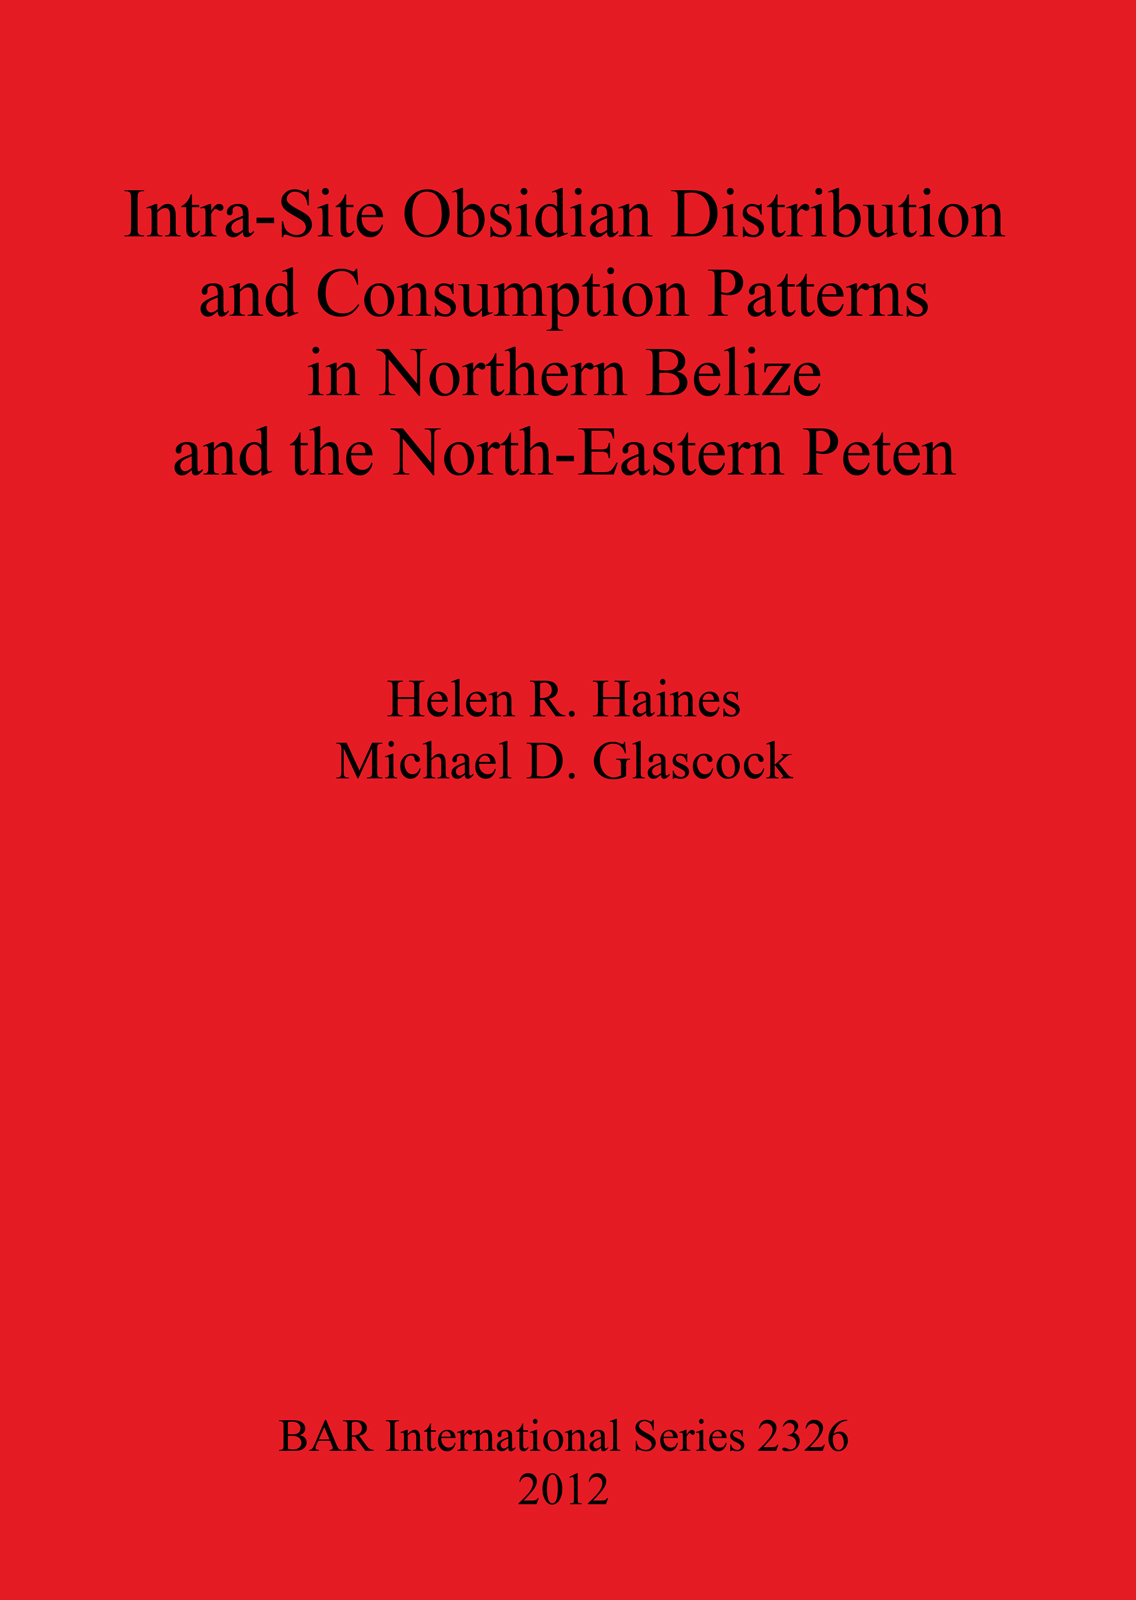 Intra-site Obsidian Distribution and Consumption Patterns in Northern Belize and the North-Eastern Peten